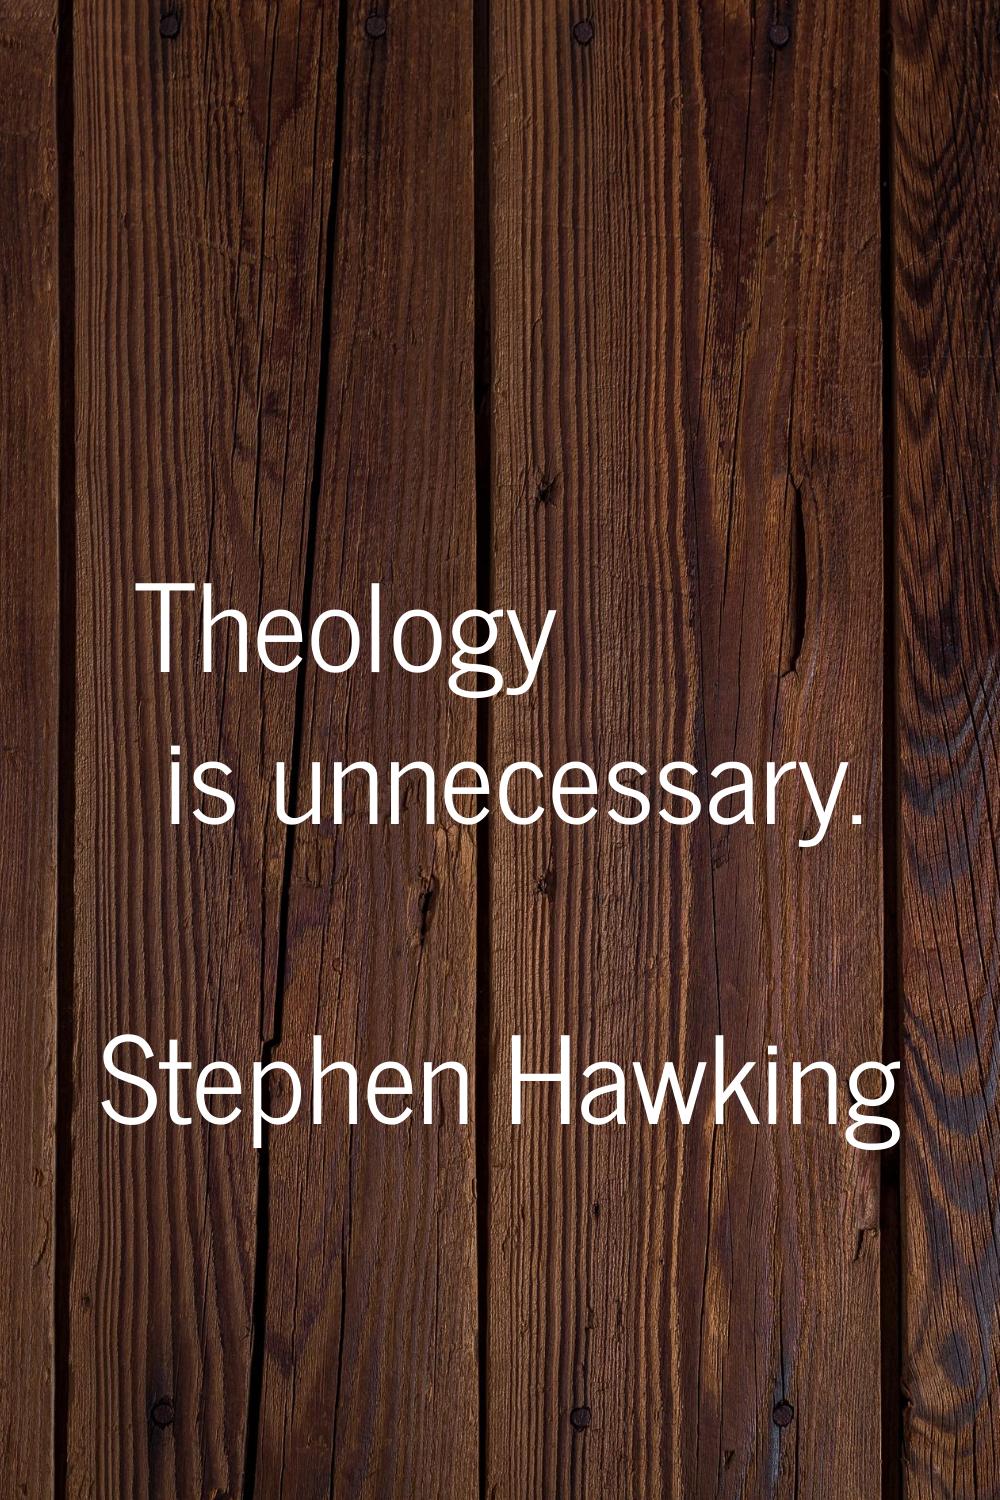 Theology is unnecessary.